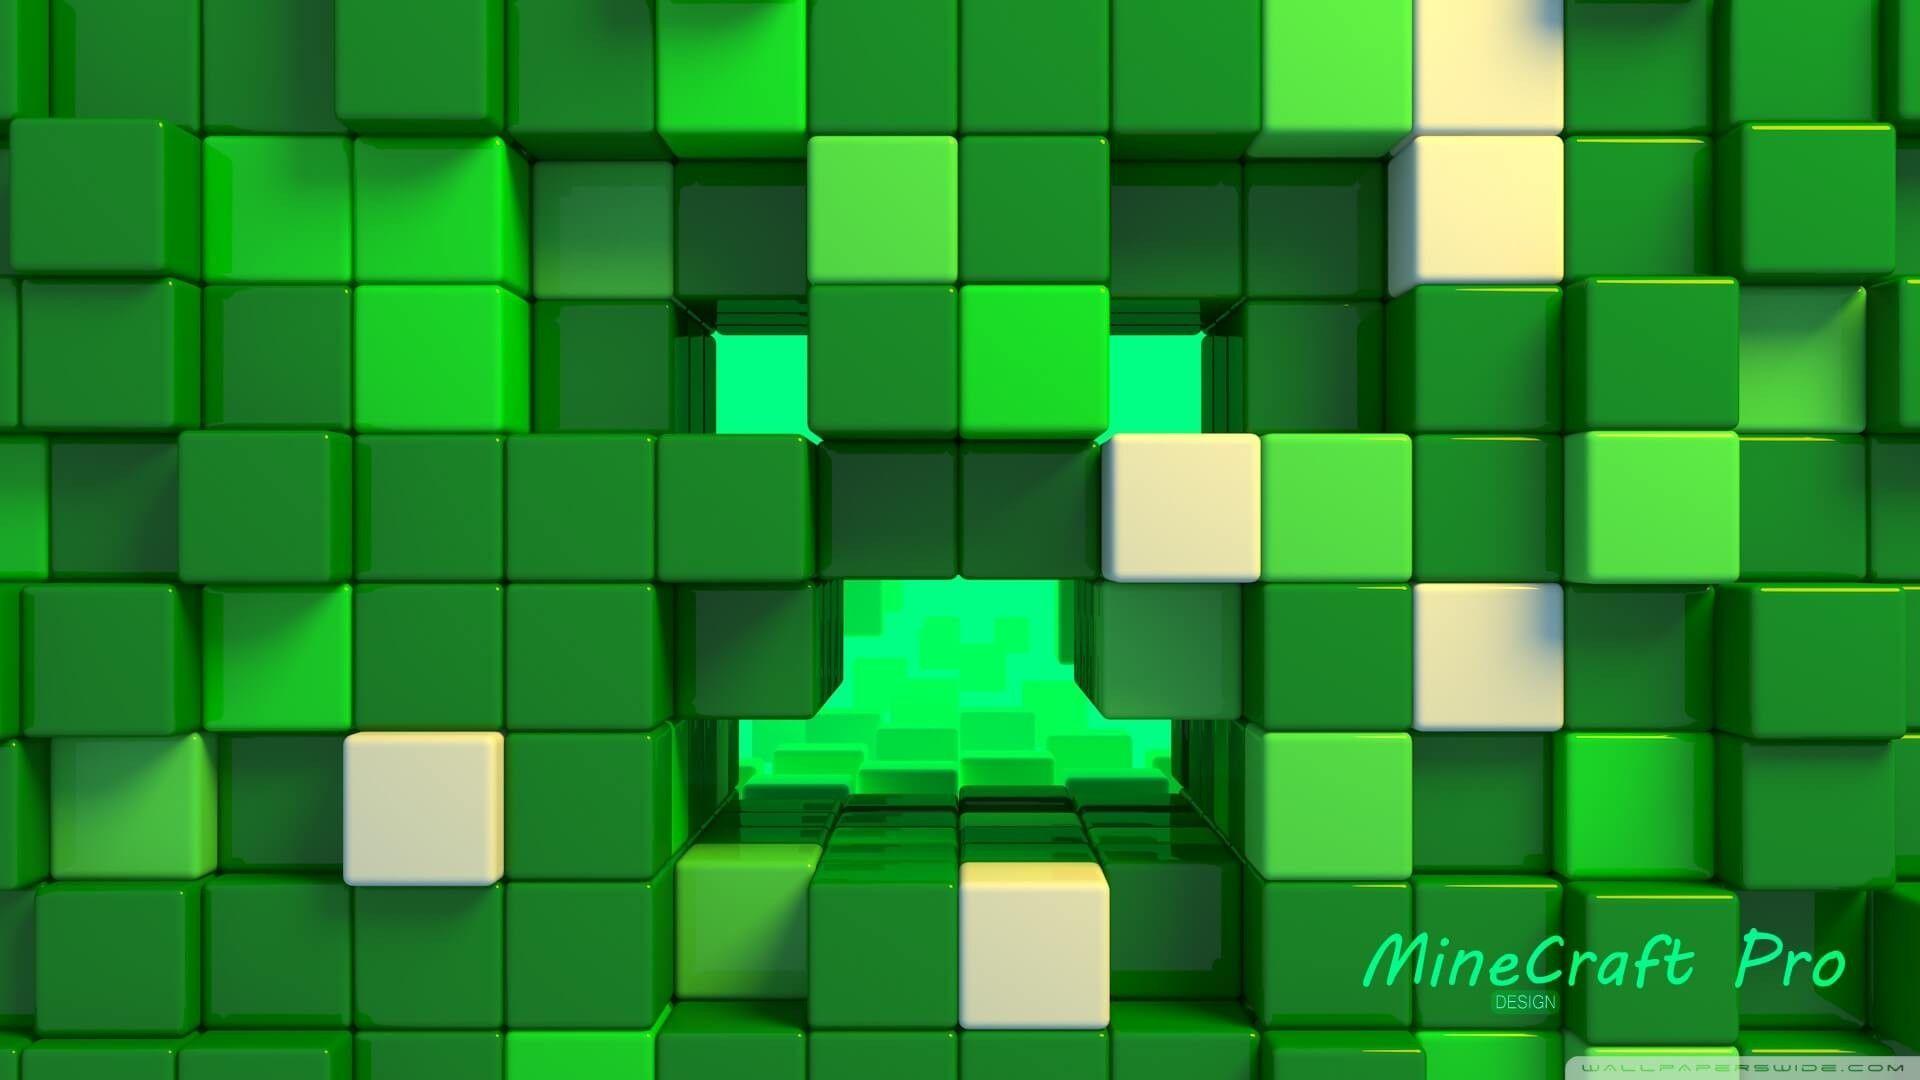 Minecraft Image Wallpaper background picture